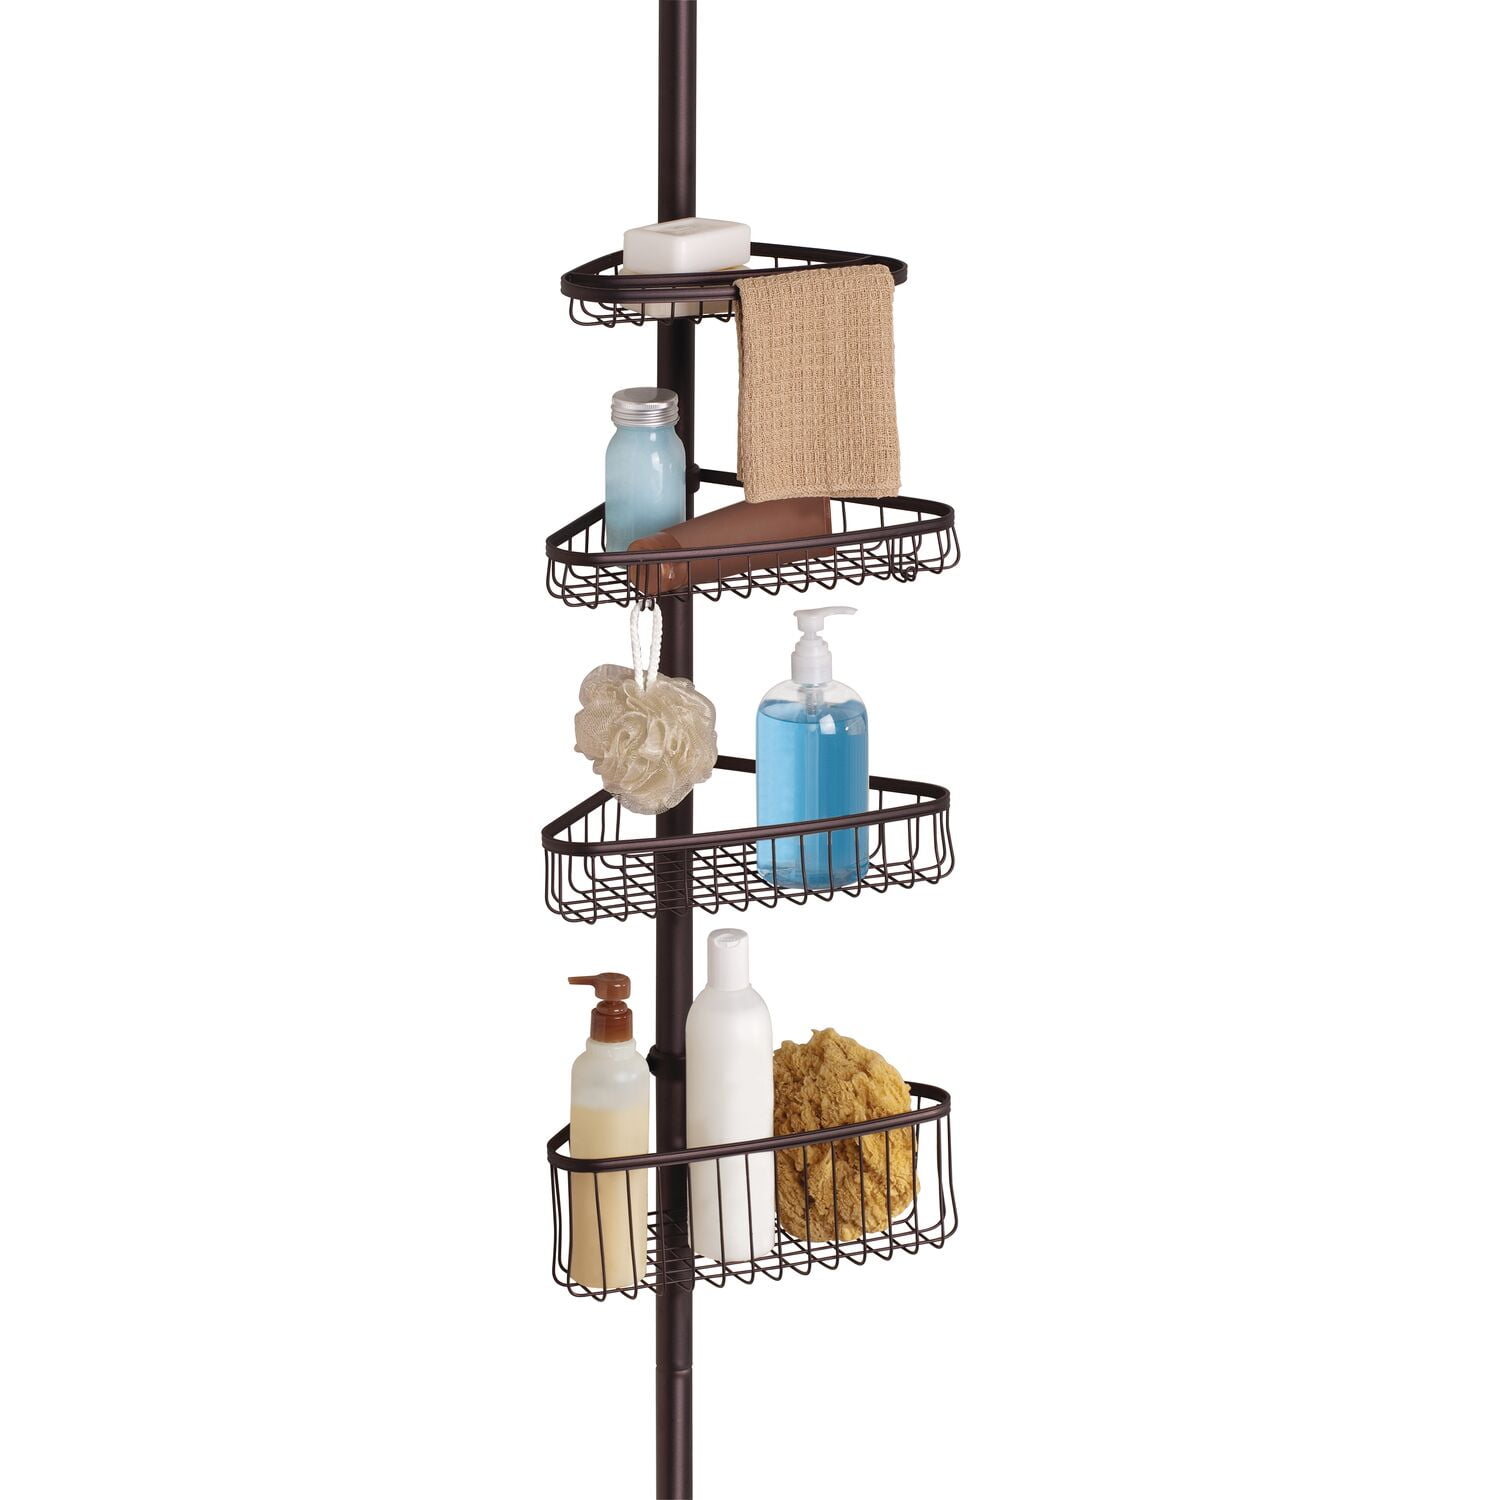 ARTIKA Allegro Extendable Shower Caddy with 1 Mirror and Adjustable Racks  and Shelves, Stainless Steel